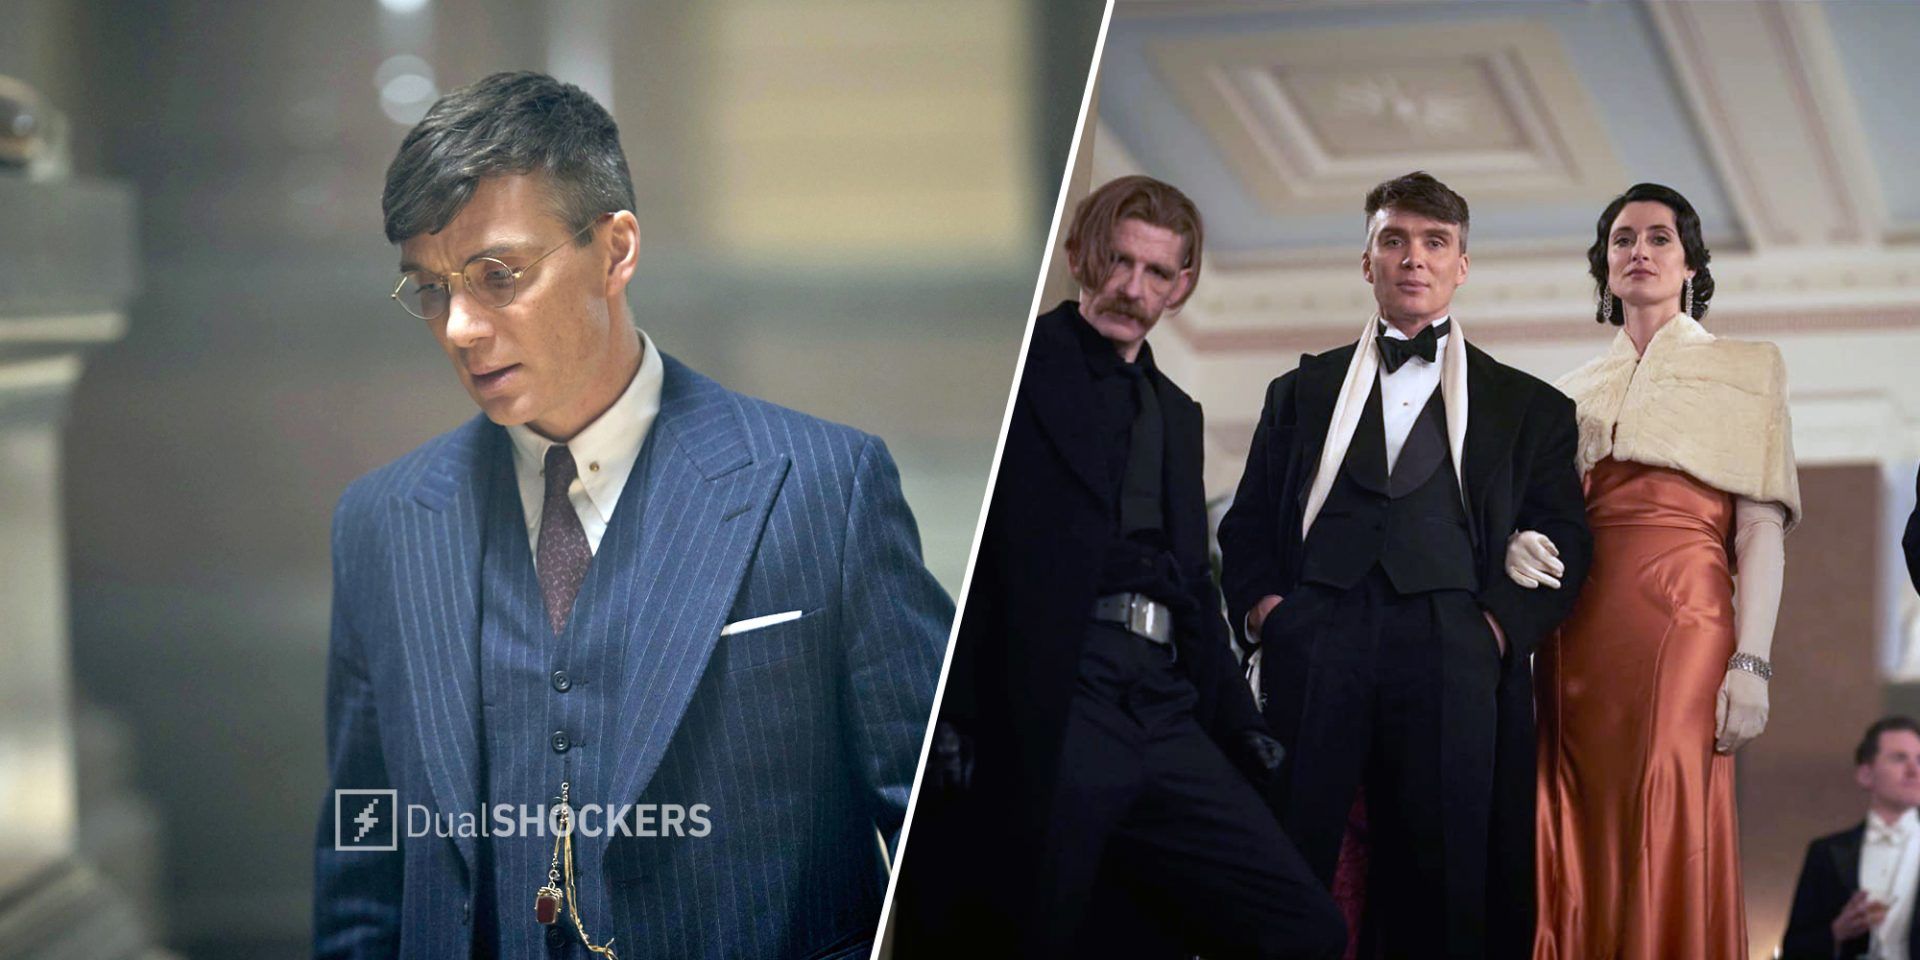 Peaky Blinders Tommy Shelby with glasses on left, Arthur Shelby, Tommy Shelby, and Lizzie Shelby in fancy clothes on right